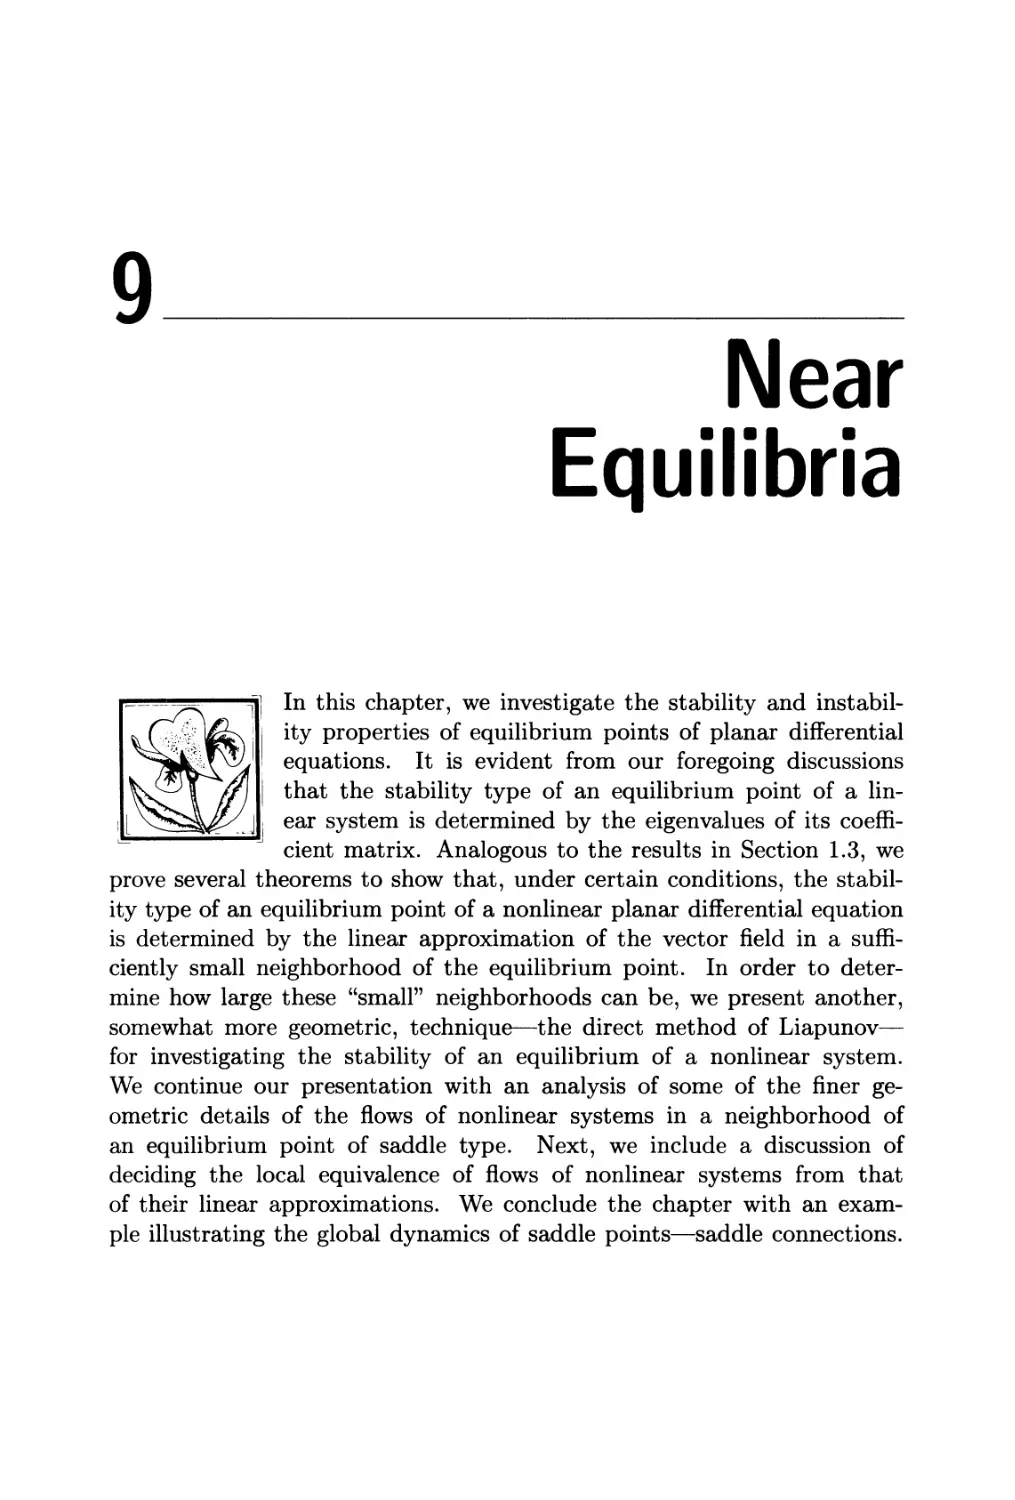 Chapter 9. Near Equilibria